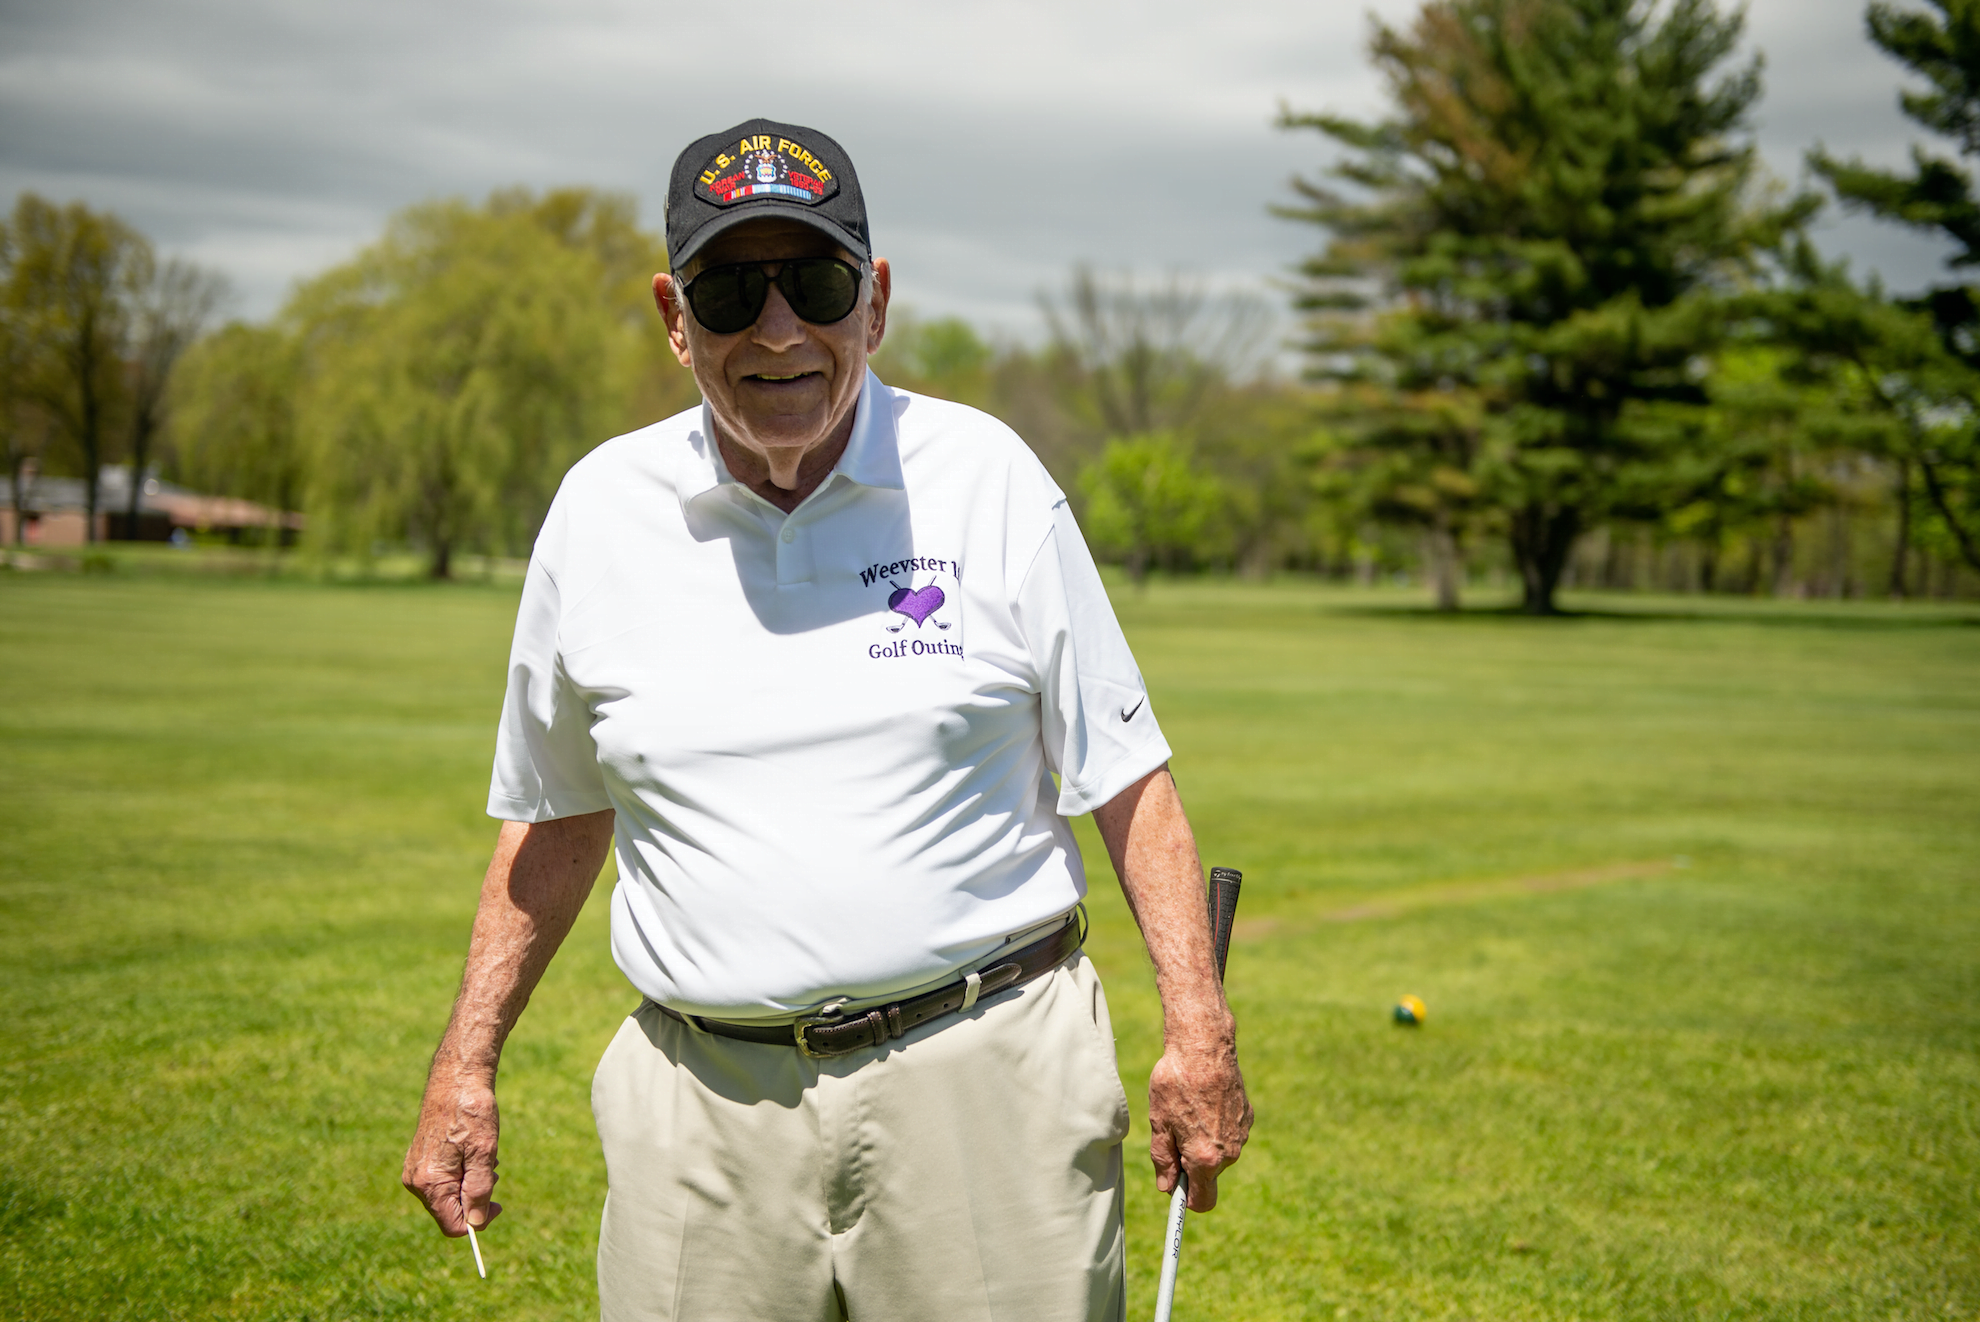 First Annual Weevster 18 Golf Outing. May 6, 2019 Photo: Will Lanzoni